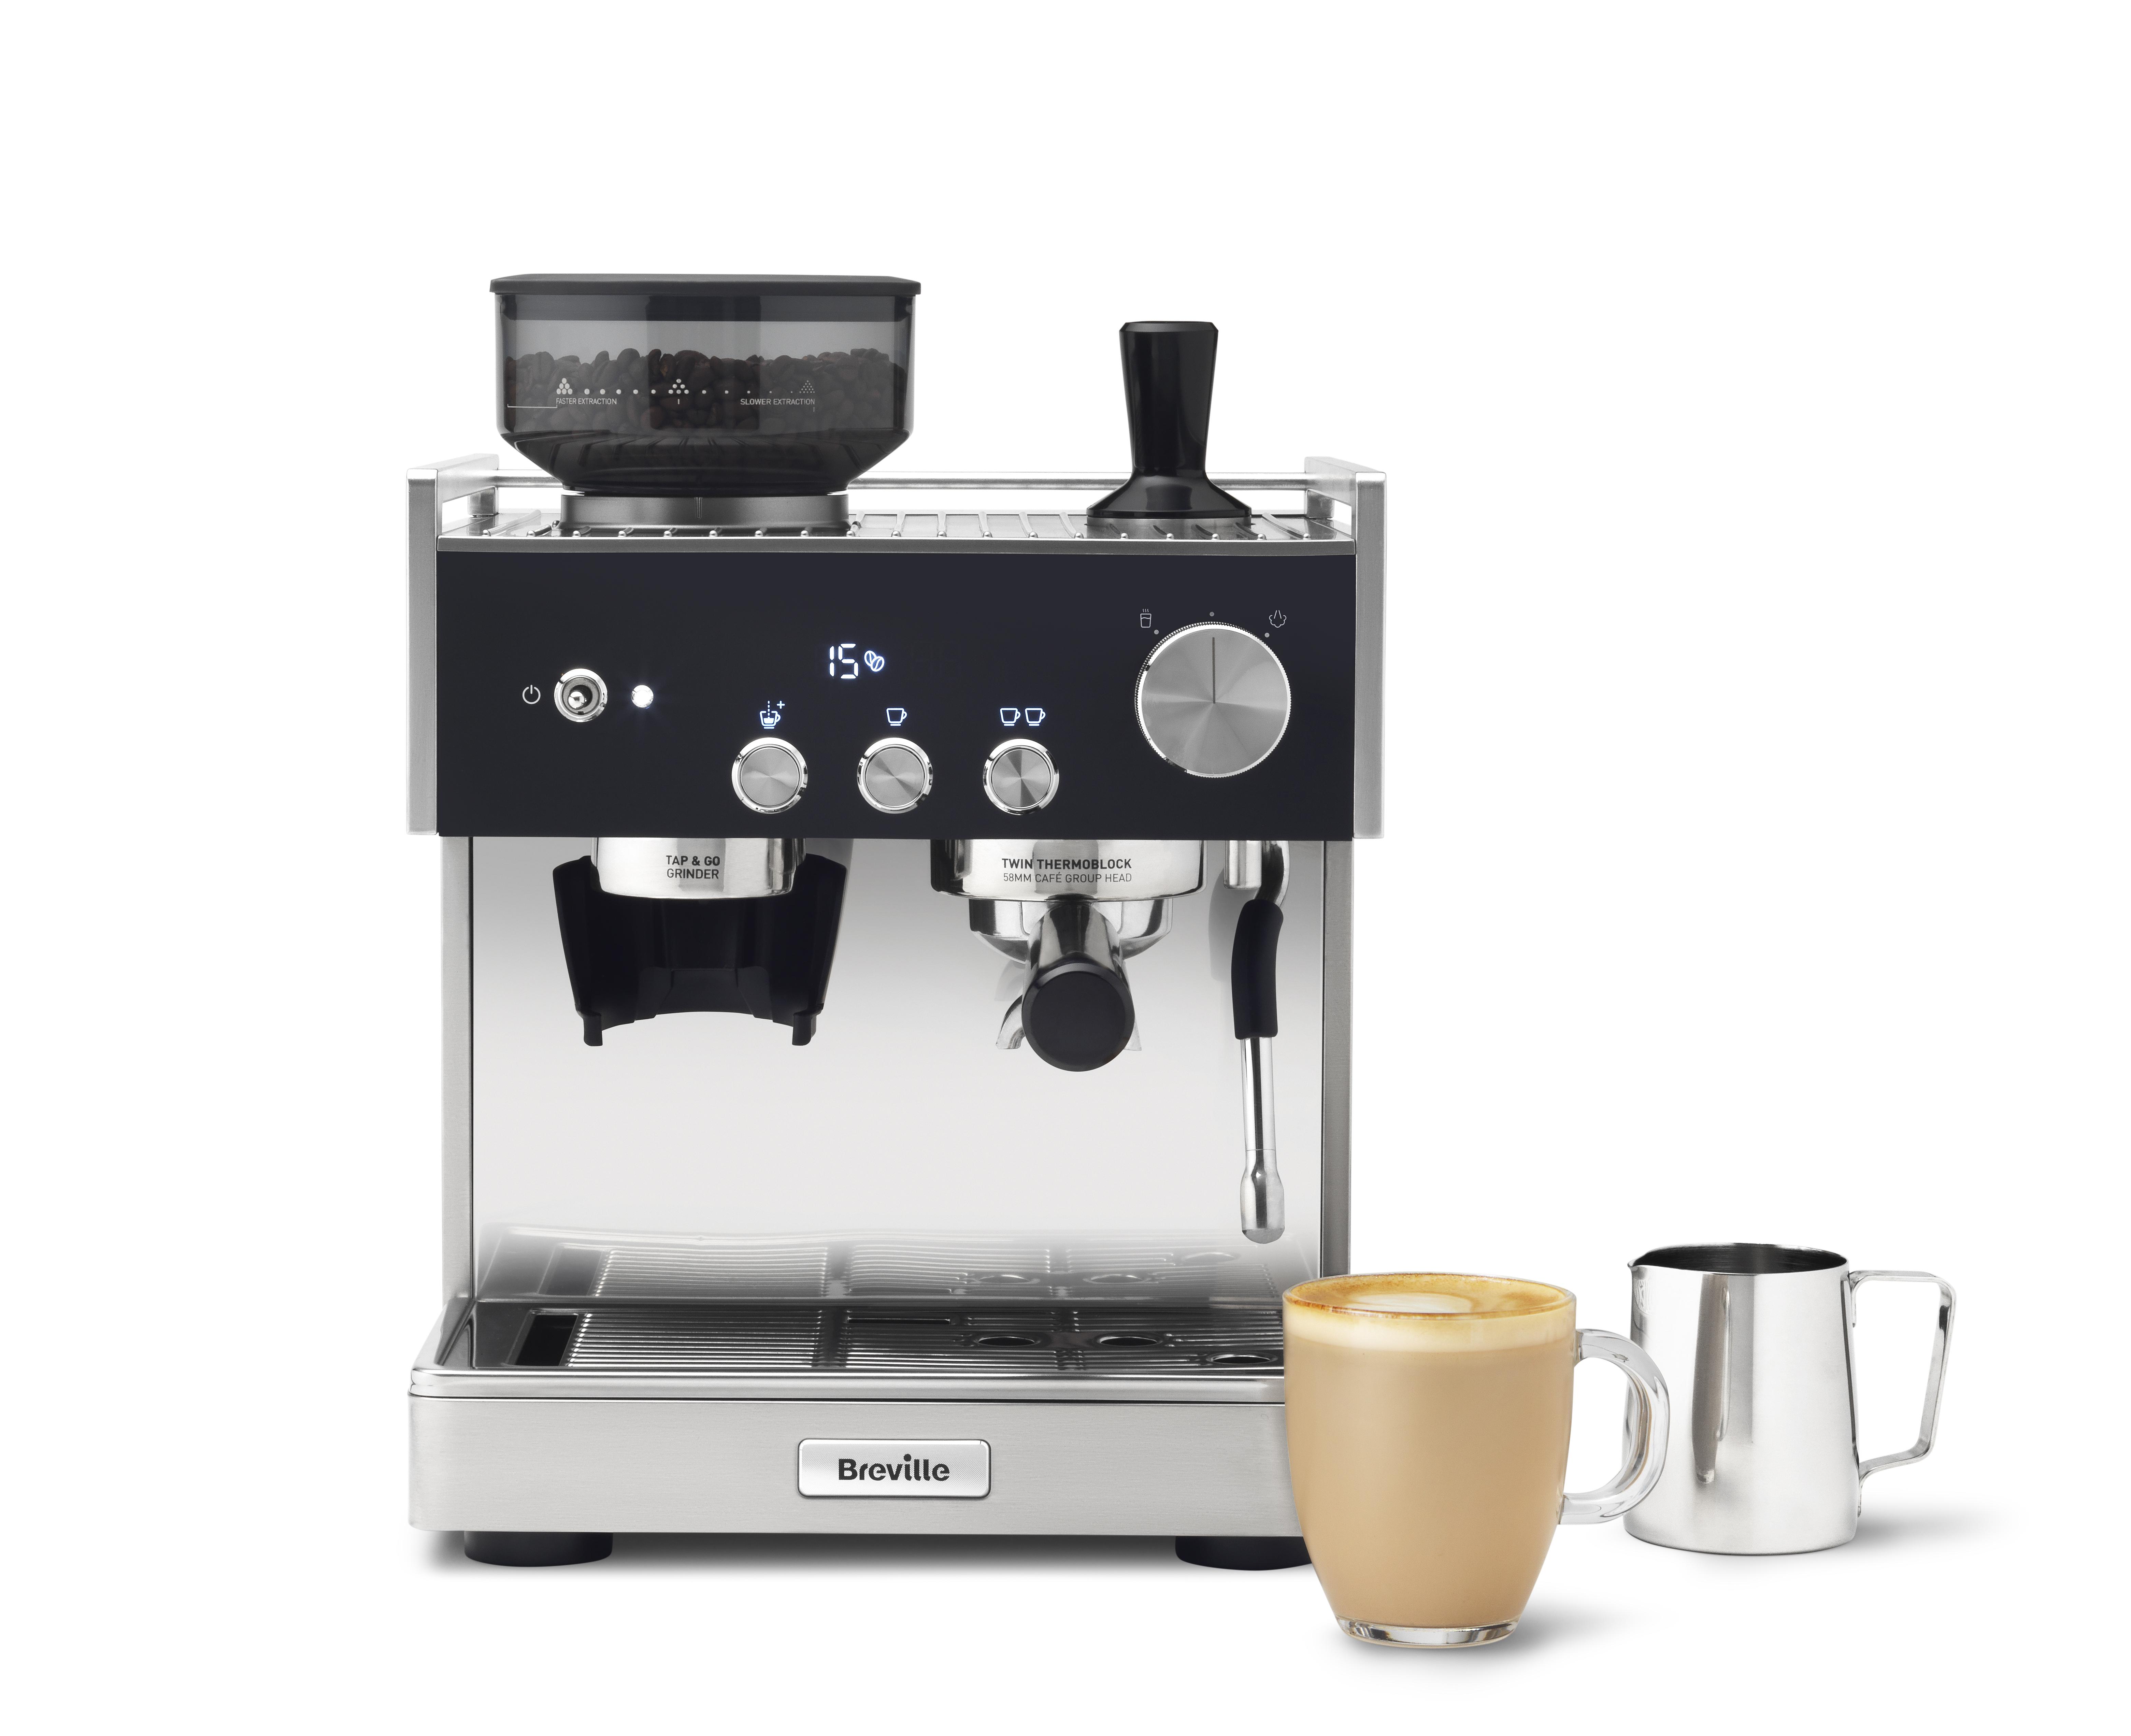 BREVILLE Barista Signature Espresso VCF160 Bean to Cup Coffee Machine - Stainless Steel, Stainless Steel